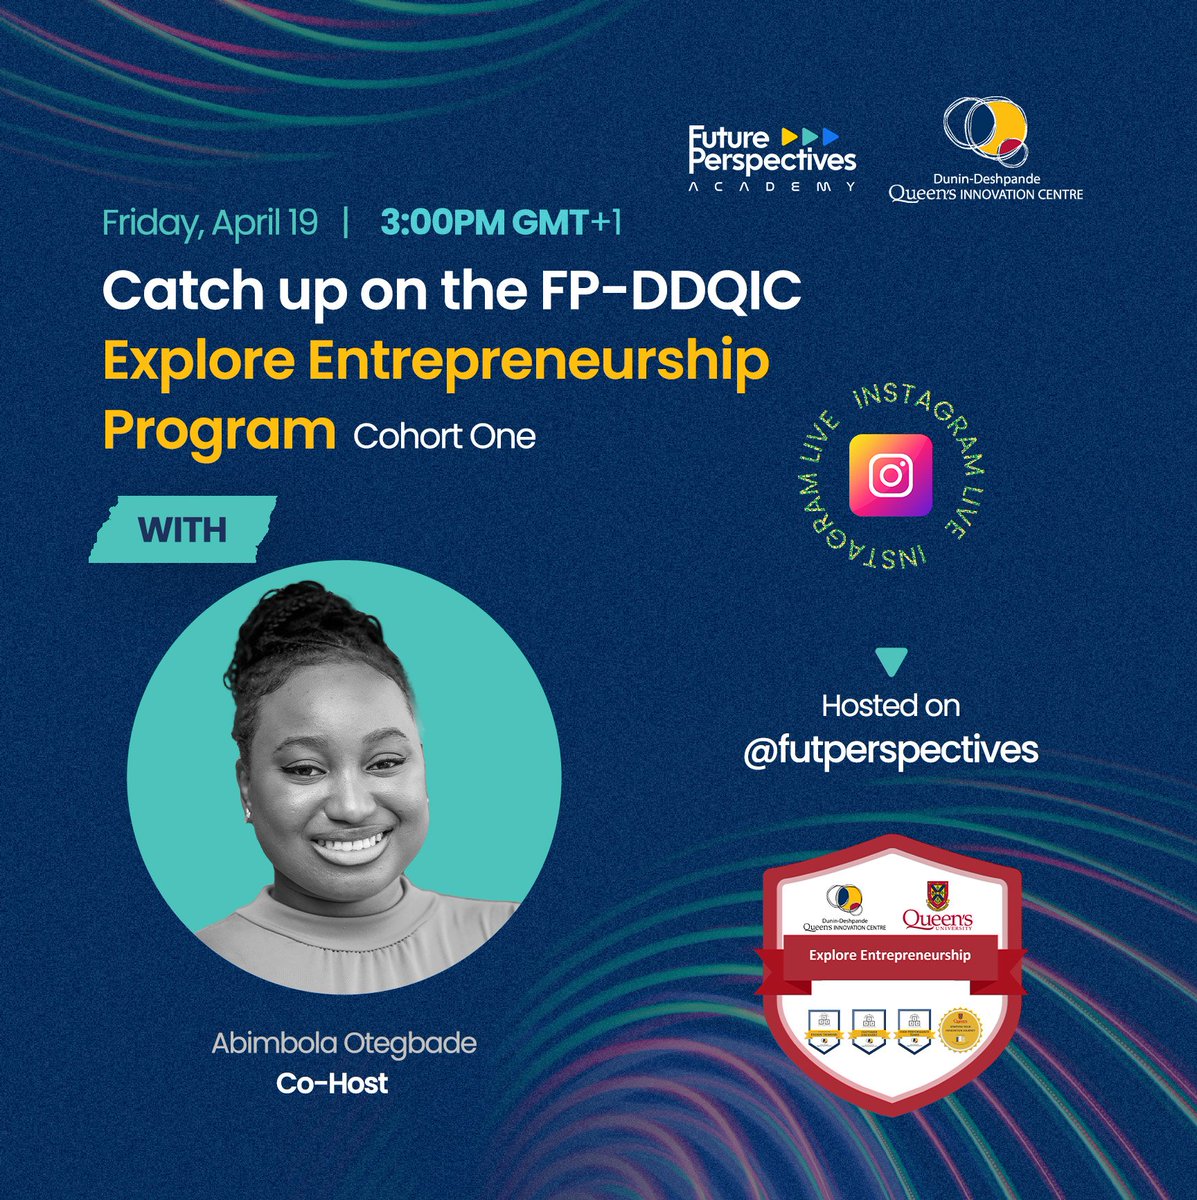 Meet our co-host Abimbola Otegbade who is an #itet Fellow and recently completed her Explore Entrepreneurship course. 

Don't miss out. Make sure you join us live and ask your questions! 

Date: Friday, April 19, 2024
Time: 3:00pm

See you there!